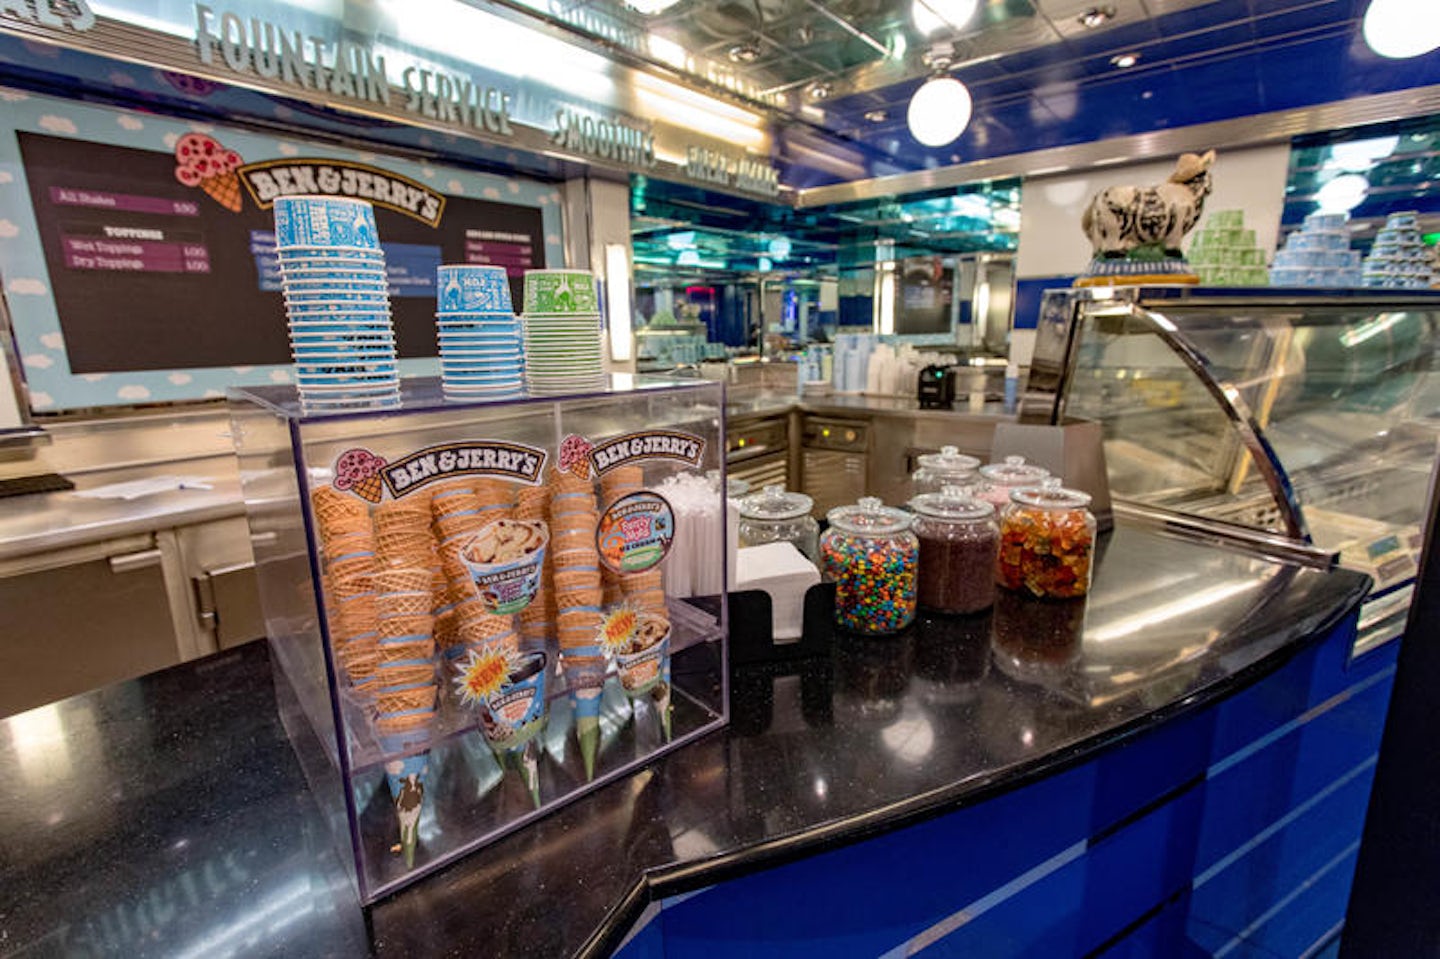 Ben & Jerry's on Independence of the Seas